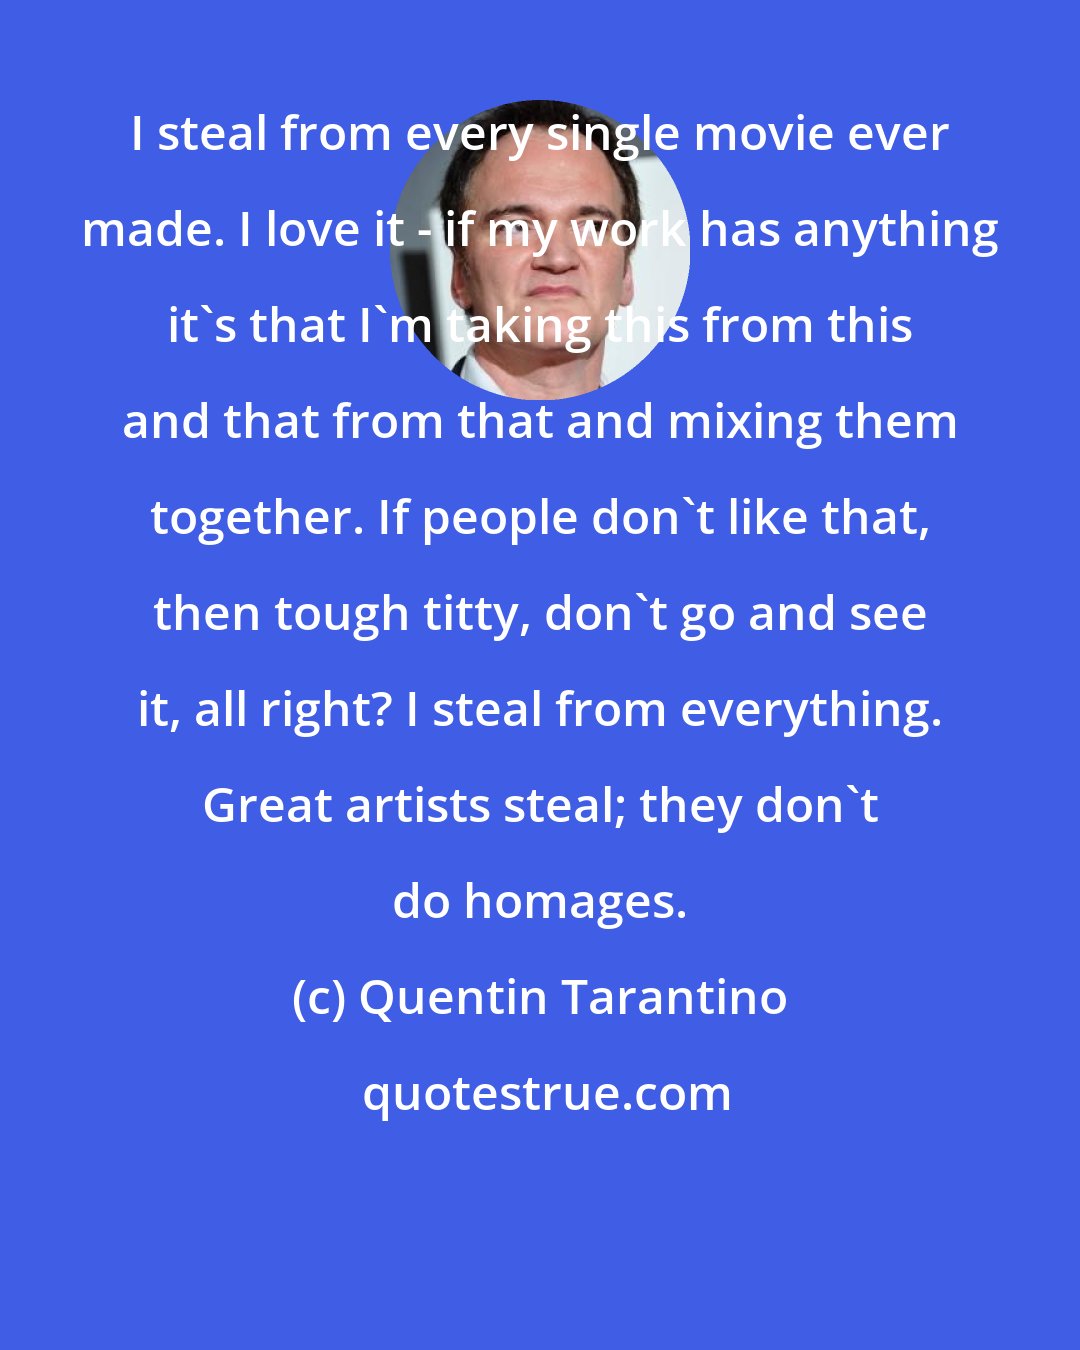 Quentin Tarantino: I steal from every single movie ever made. I love it - if my work has anything it's that I'm taking this from this and that from that and mixing them together. If people don't like that, then tough titty, don't go and see it, all right? I steal from everything. Great artists steal; they don't do homages.